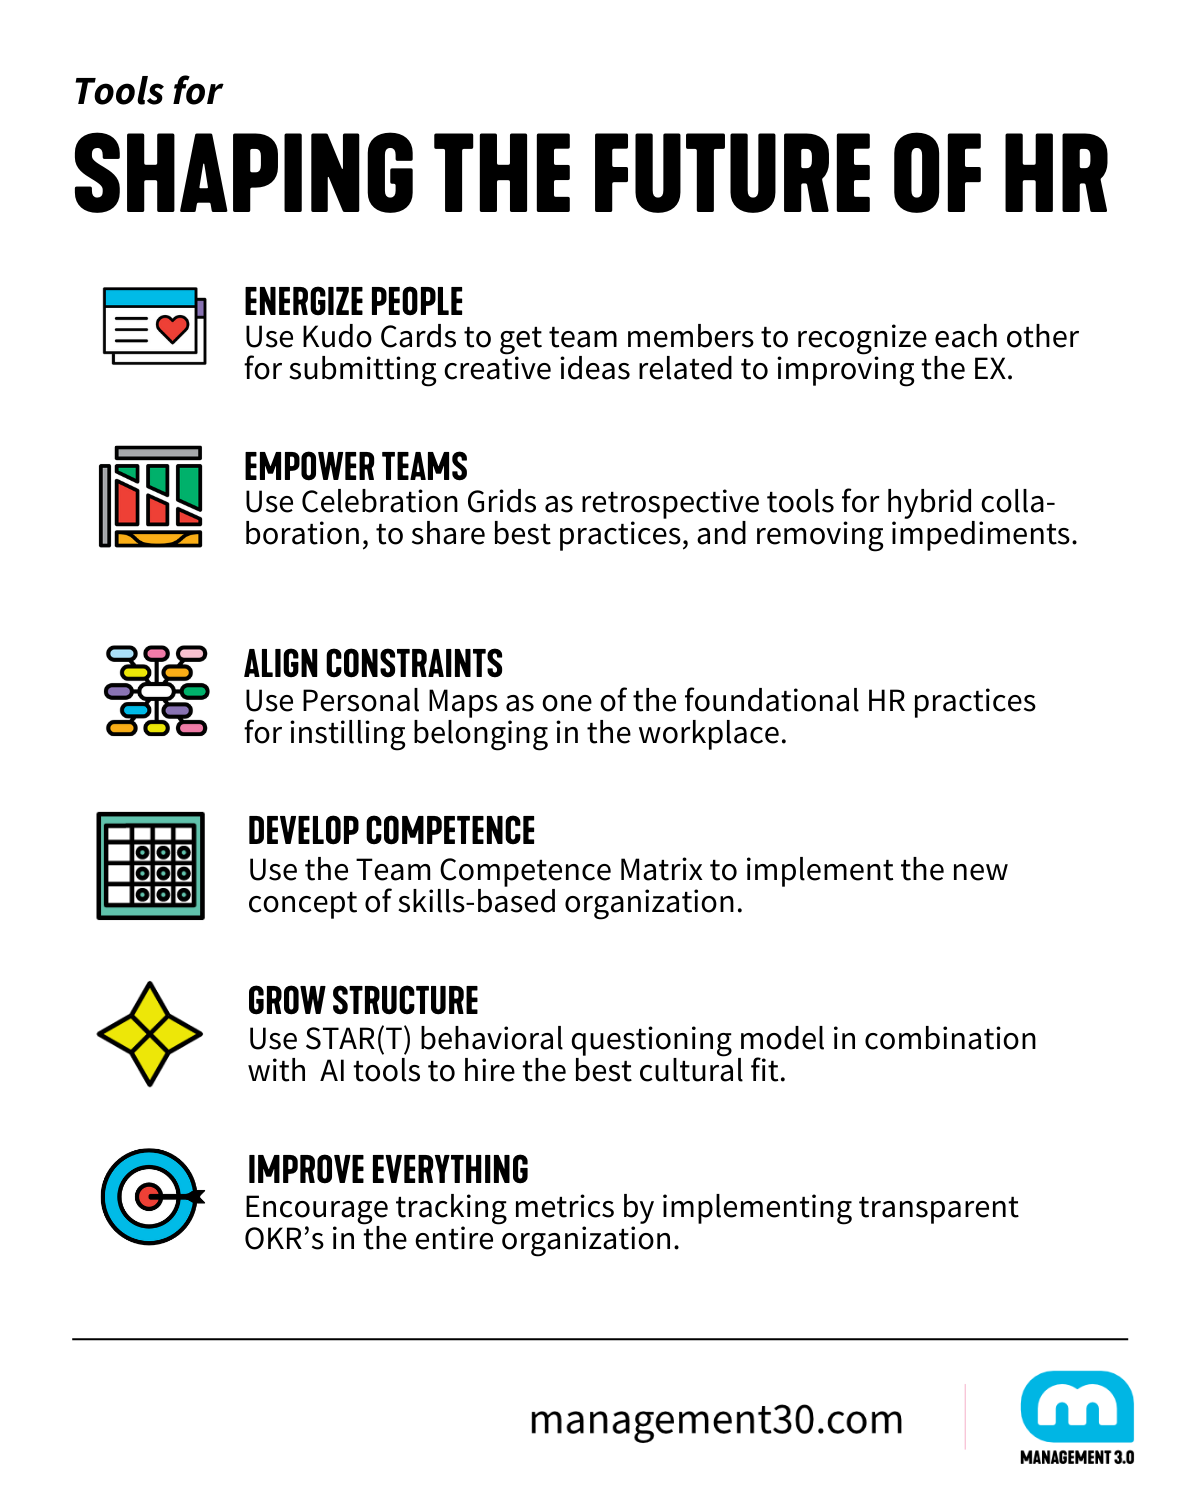 Tools for shaping the Future of HR